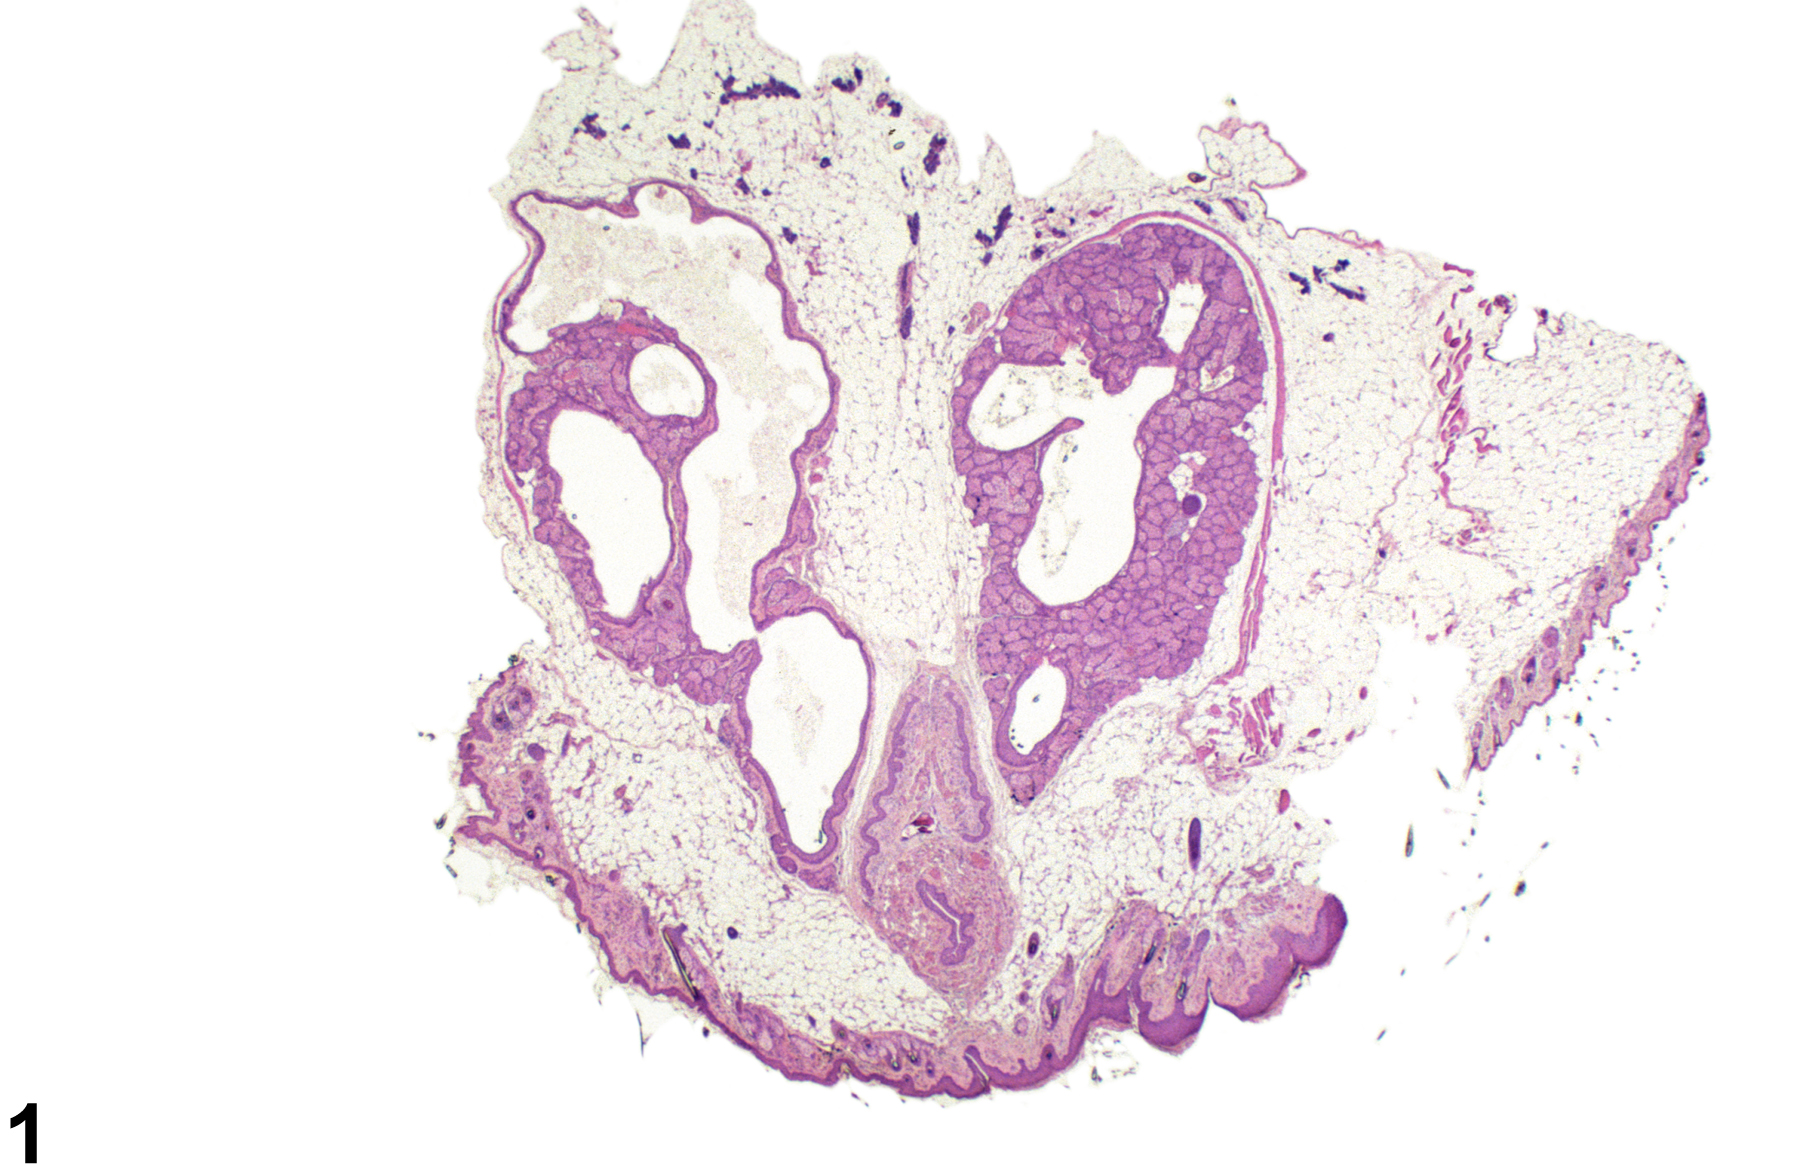 Image of atrophy in the clitoral gland from a female B6C3F1 mouse in a chronic study